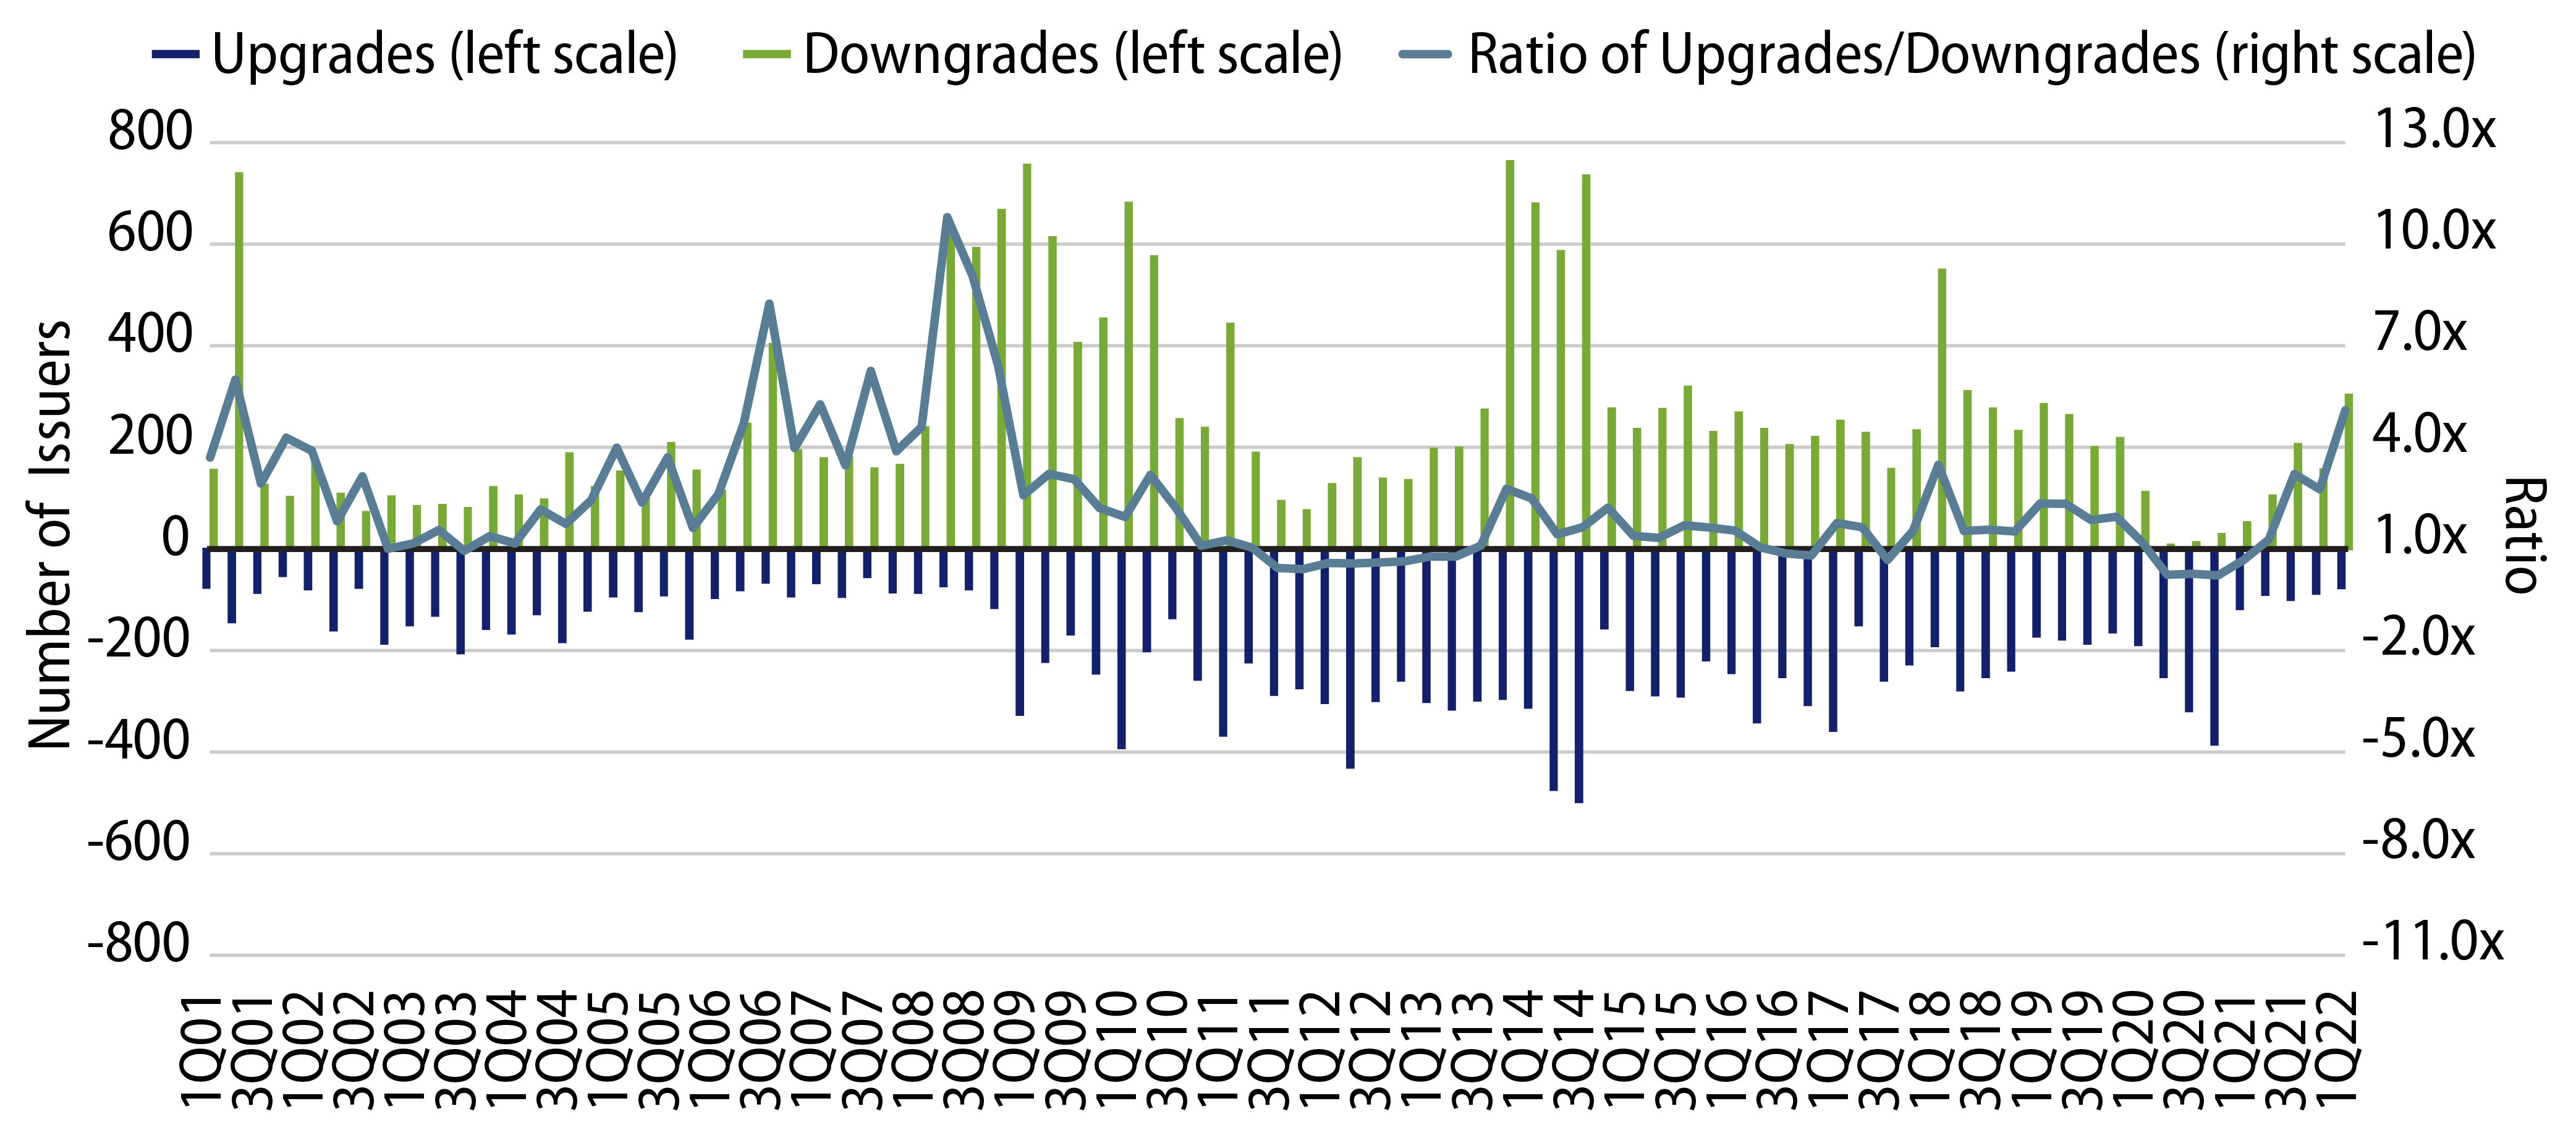 Explore Historical Upgrades and Downgrades (by Number of Issuers)—Moody’s and S&P